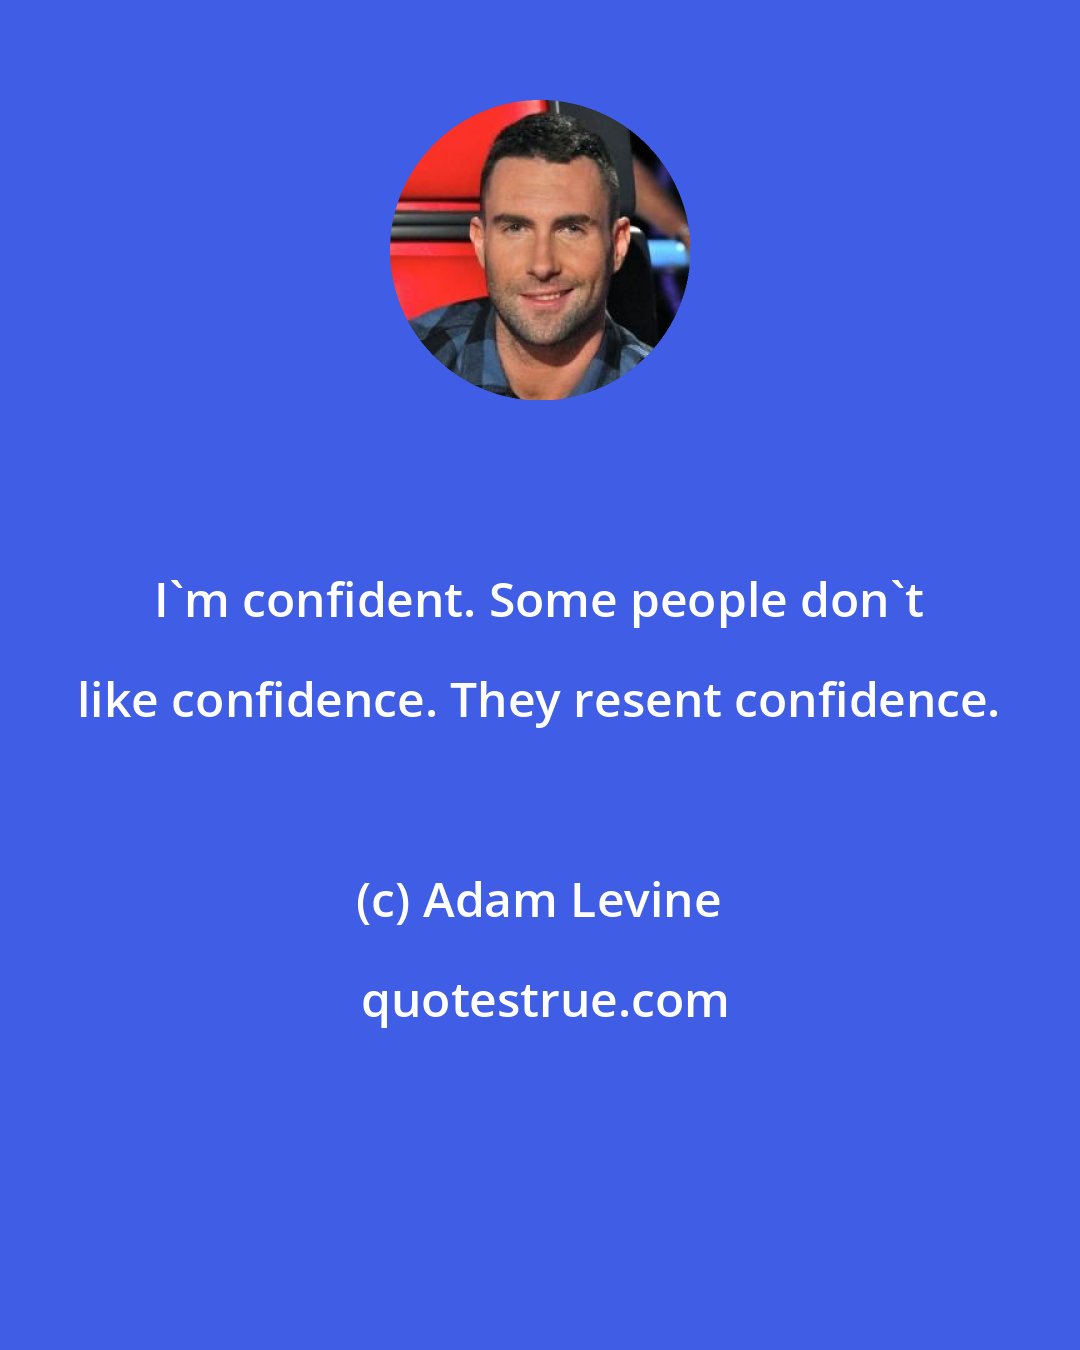 Adam Levine: I'm confident. Some people don't like confidence. They resent confidence.